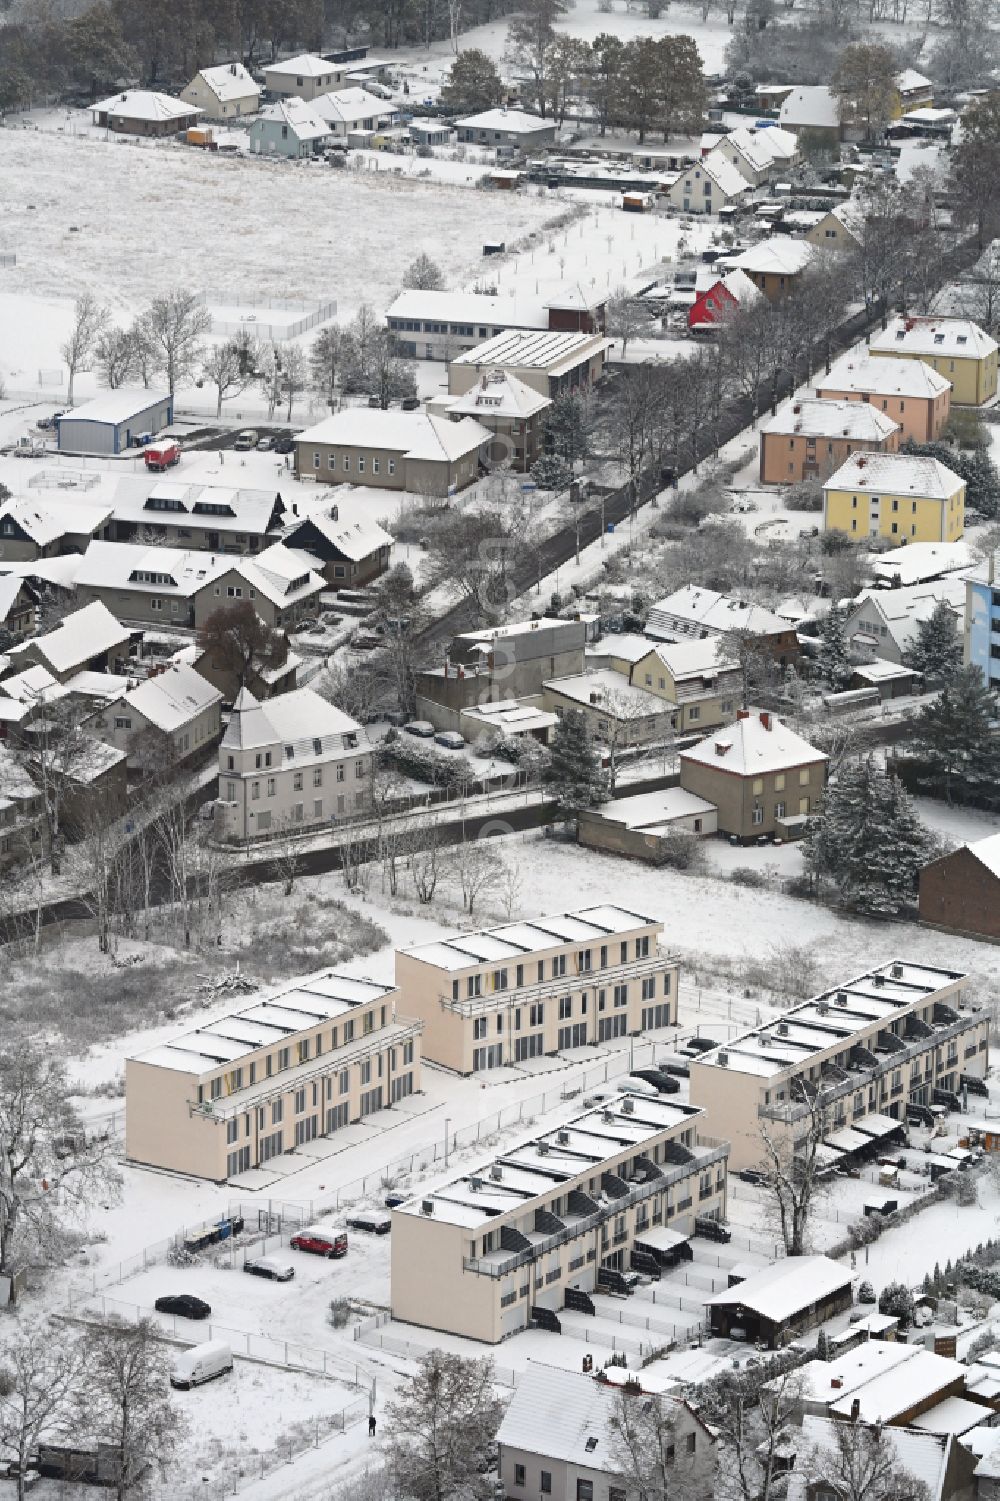 Aerial image Werneuchen - Wintry snowy construction site of a new residential area of the terraced housing estate Landsberger Strasse corner Wegendorfer Strasse in Werneuchen in the state Brandenburg, Germany